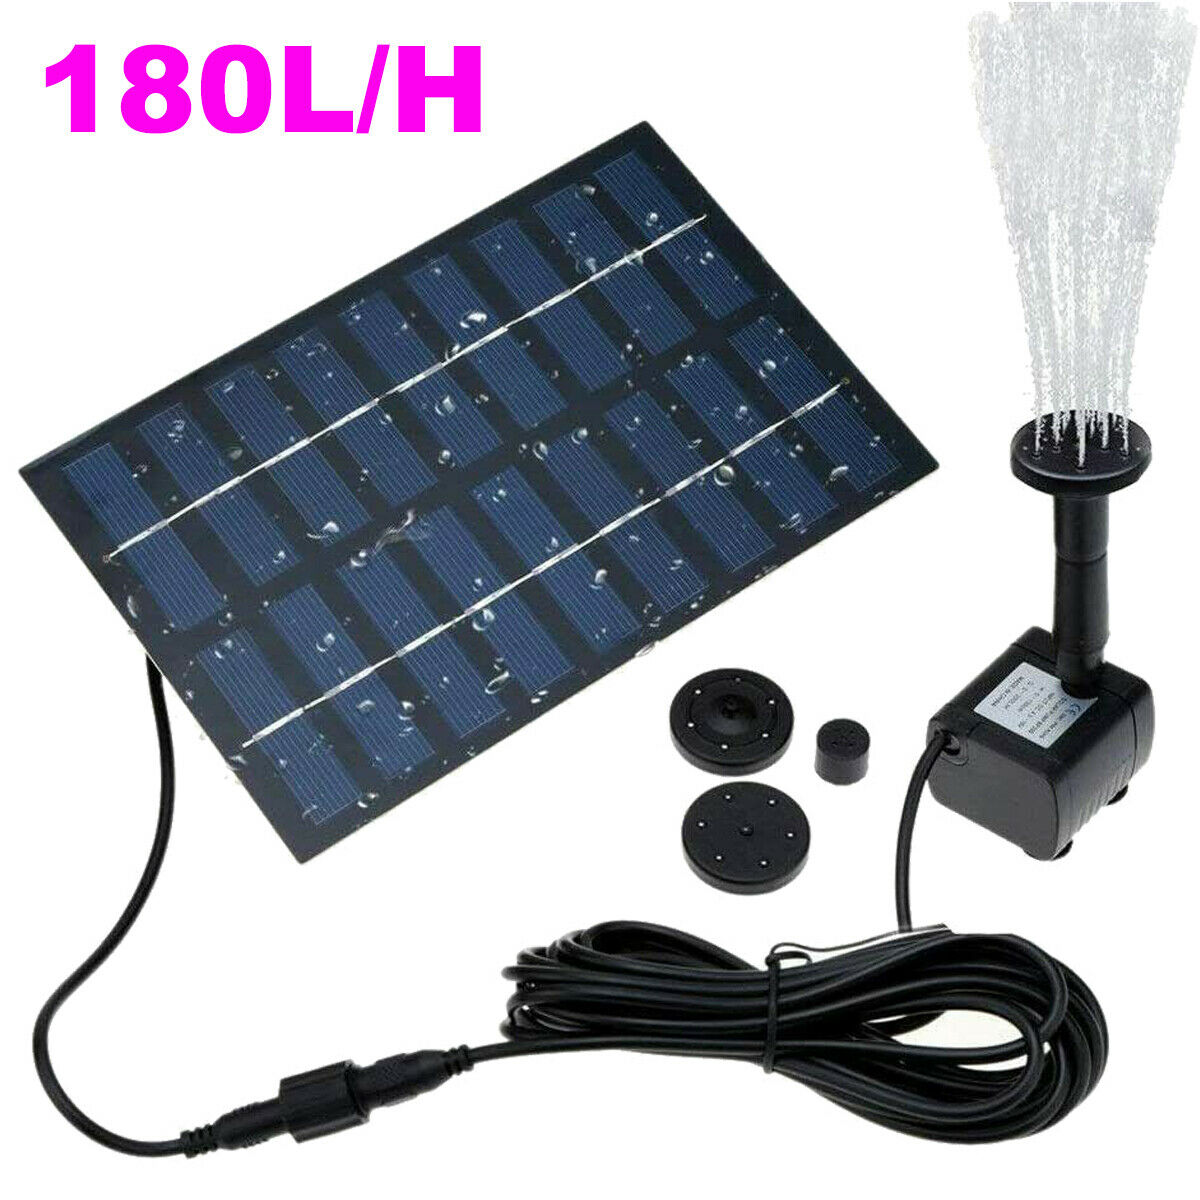 180l/h Solar Water Panel Power Fountain Pump Garden Pond Watering Submersible